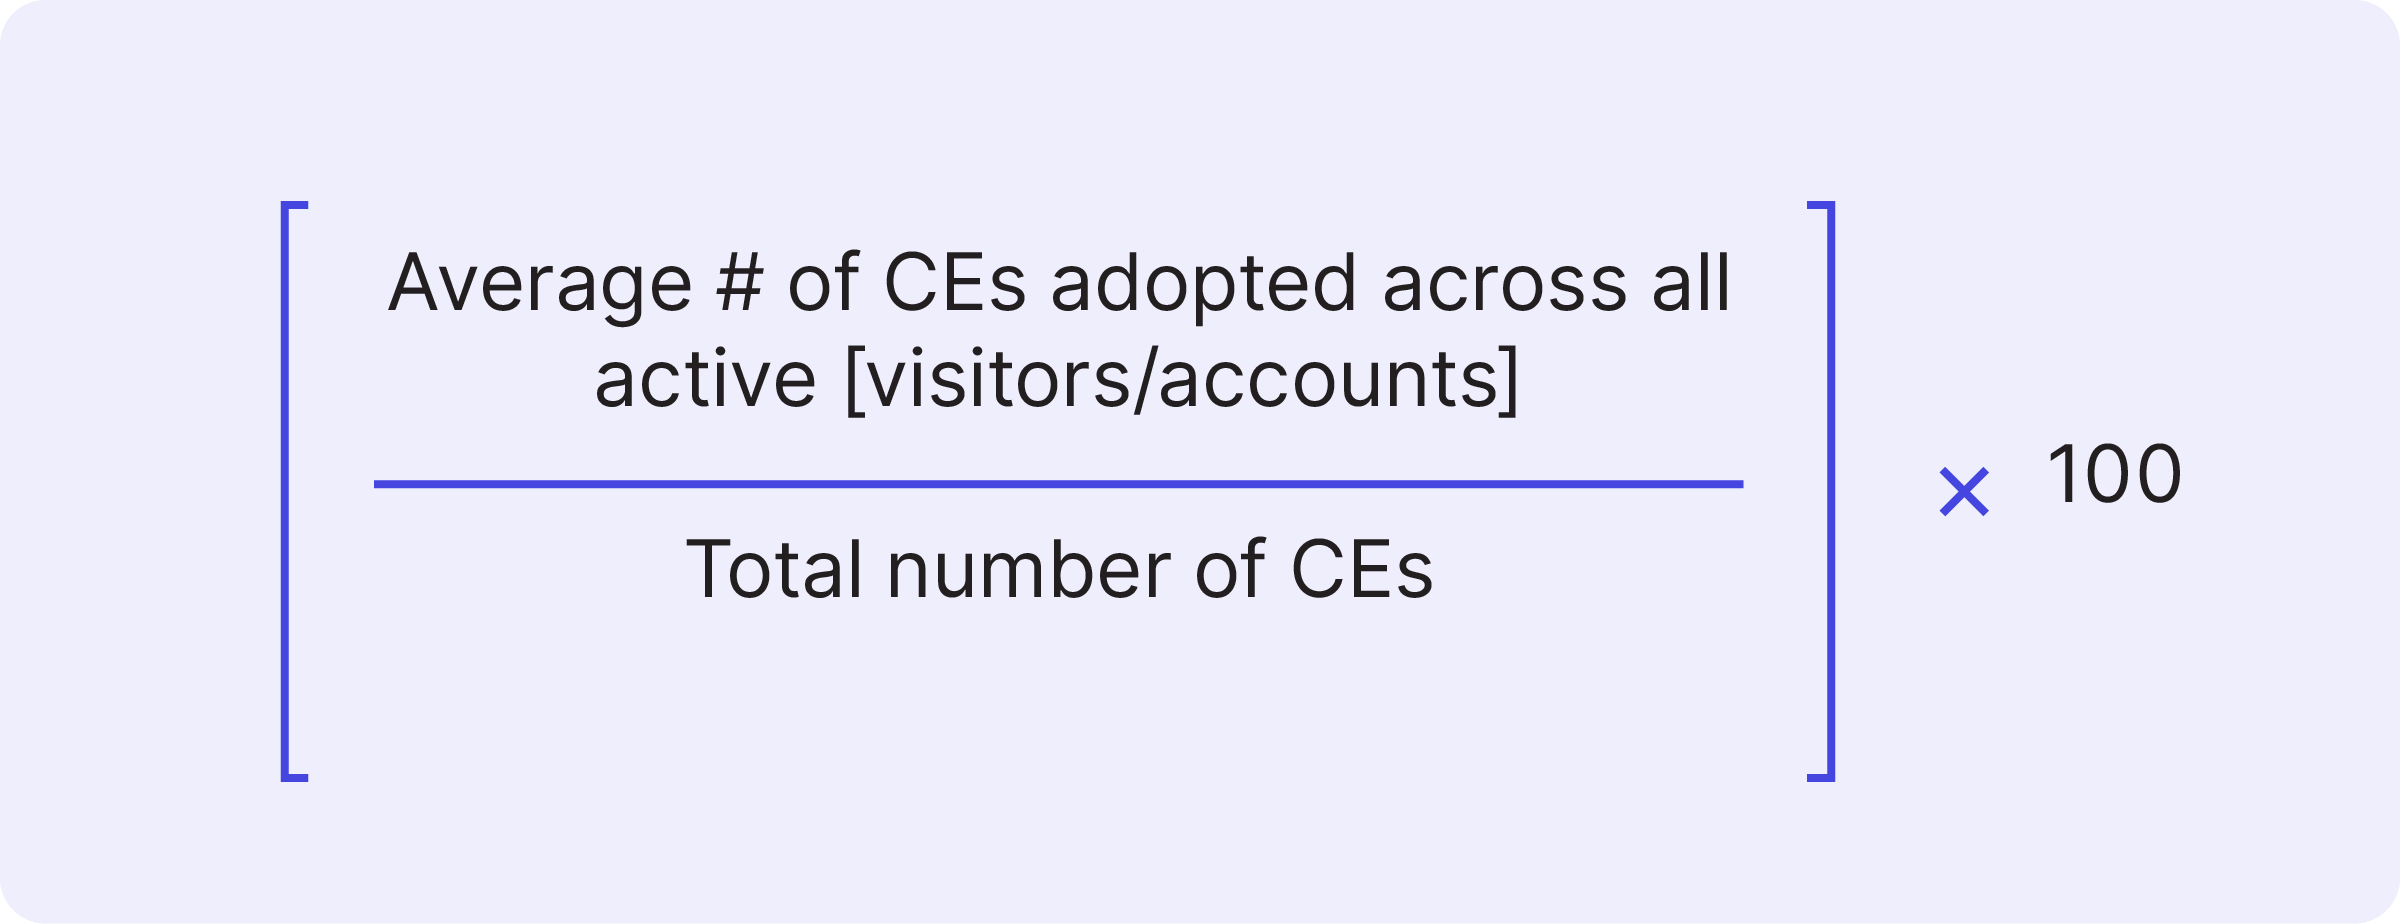 Average # of CEs adopted across all active